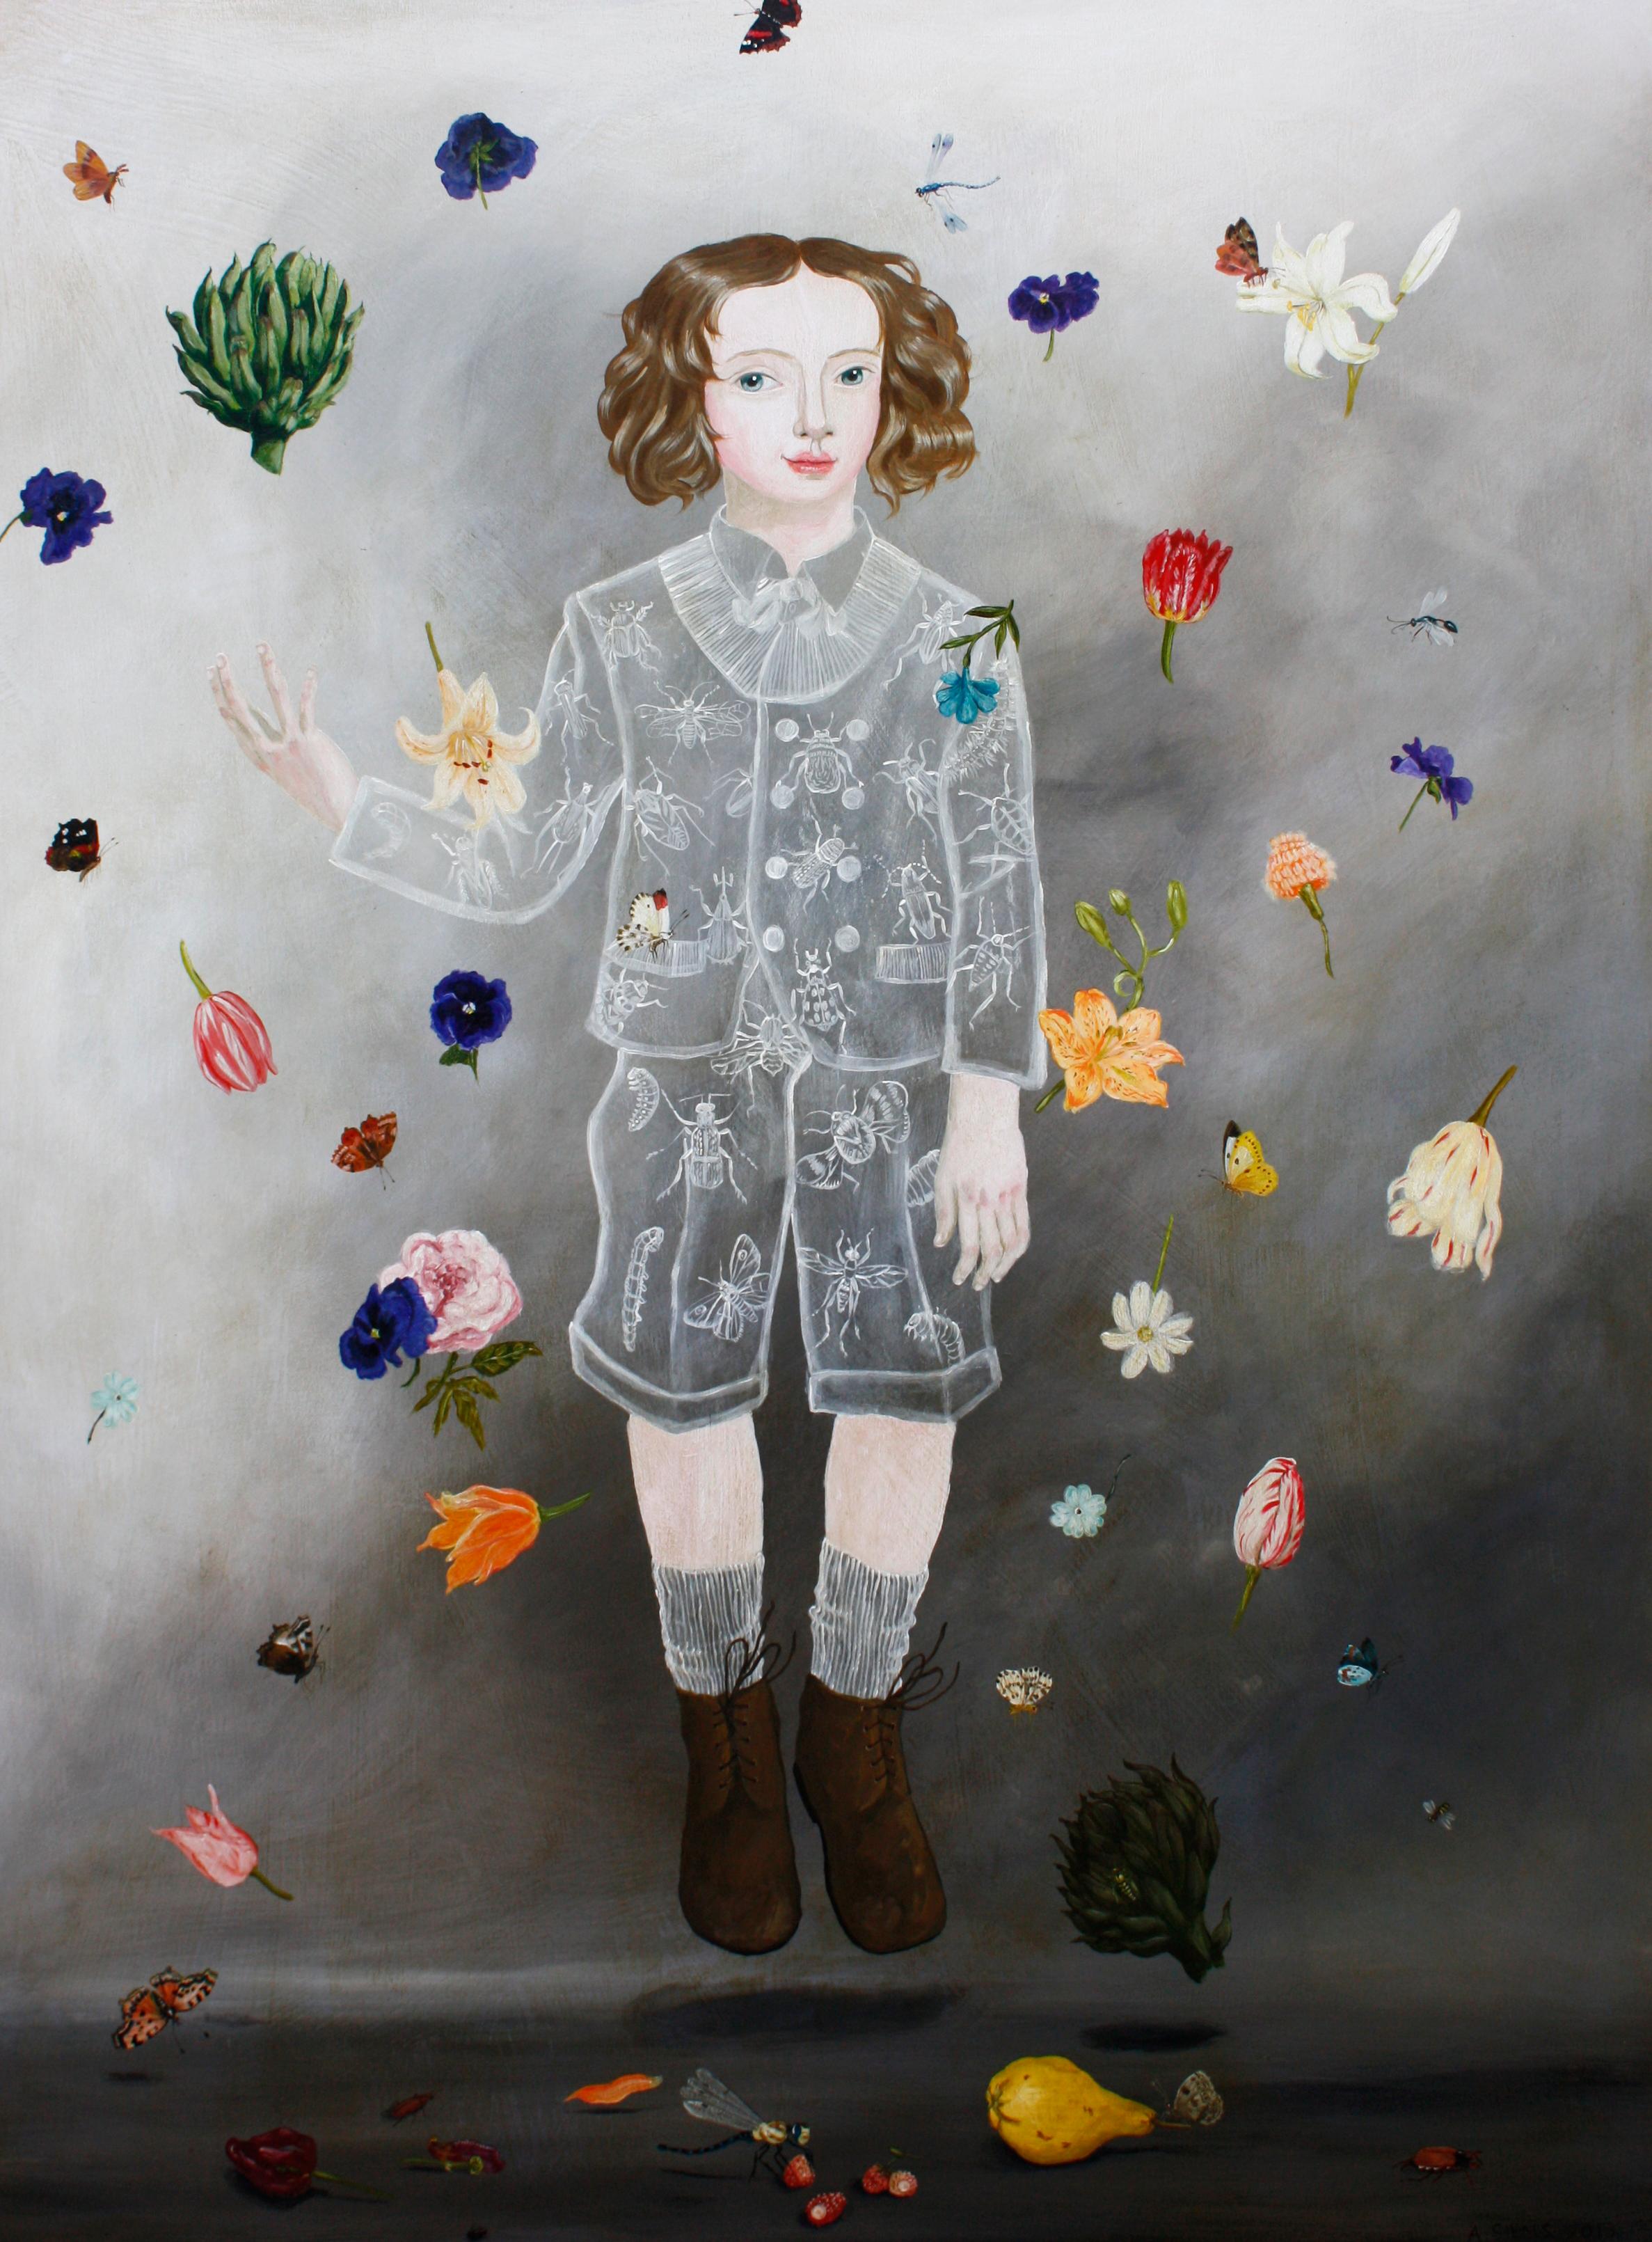 "Flowers and Insects" by Anne Siems, is a captivating figurative-narrative painting featuring a young boy, with an 18th century feel. He is floating and surrounded by colorful flowers and insects.

ANNE SIEMS
(b. 1965, Germany)

Artist Statement
I